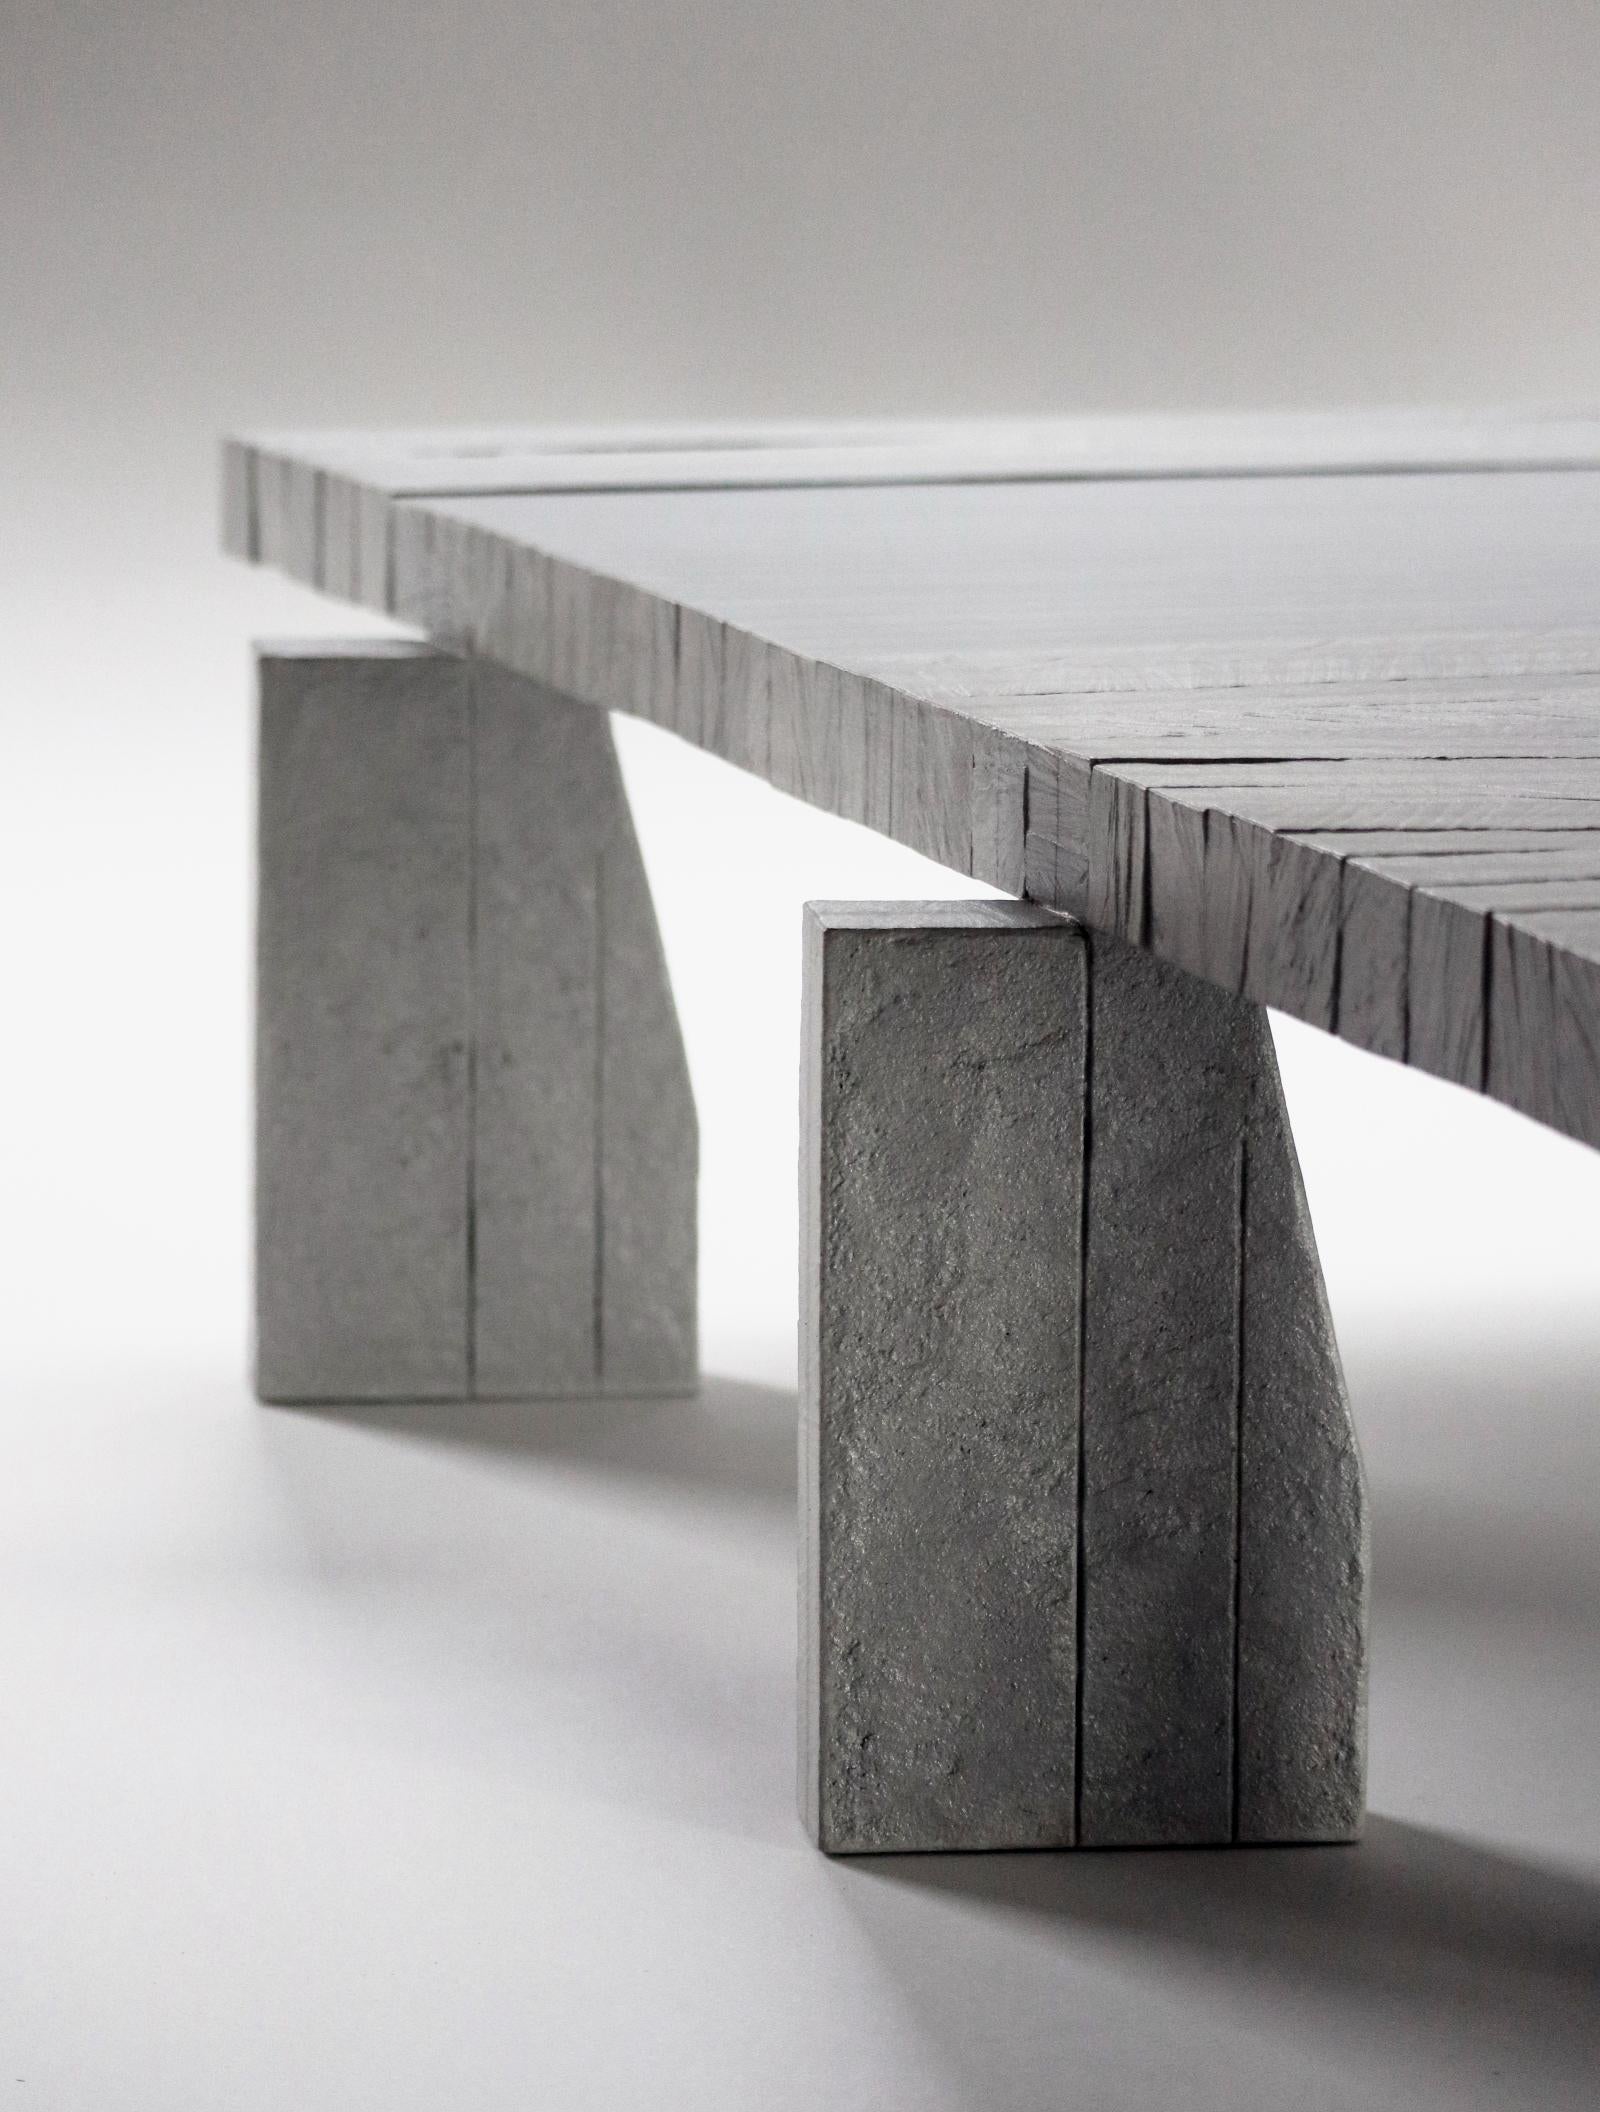 Contemporary Hand-Crafted Wooden Table, 'BRUTALISTA 01' by Marc Meeuwissen For Sale